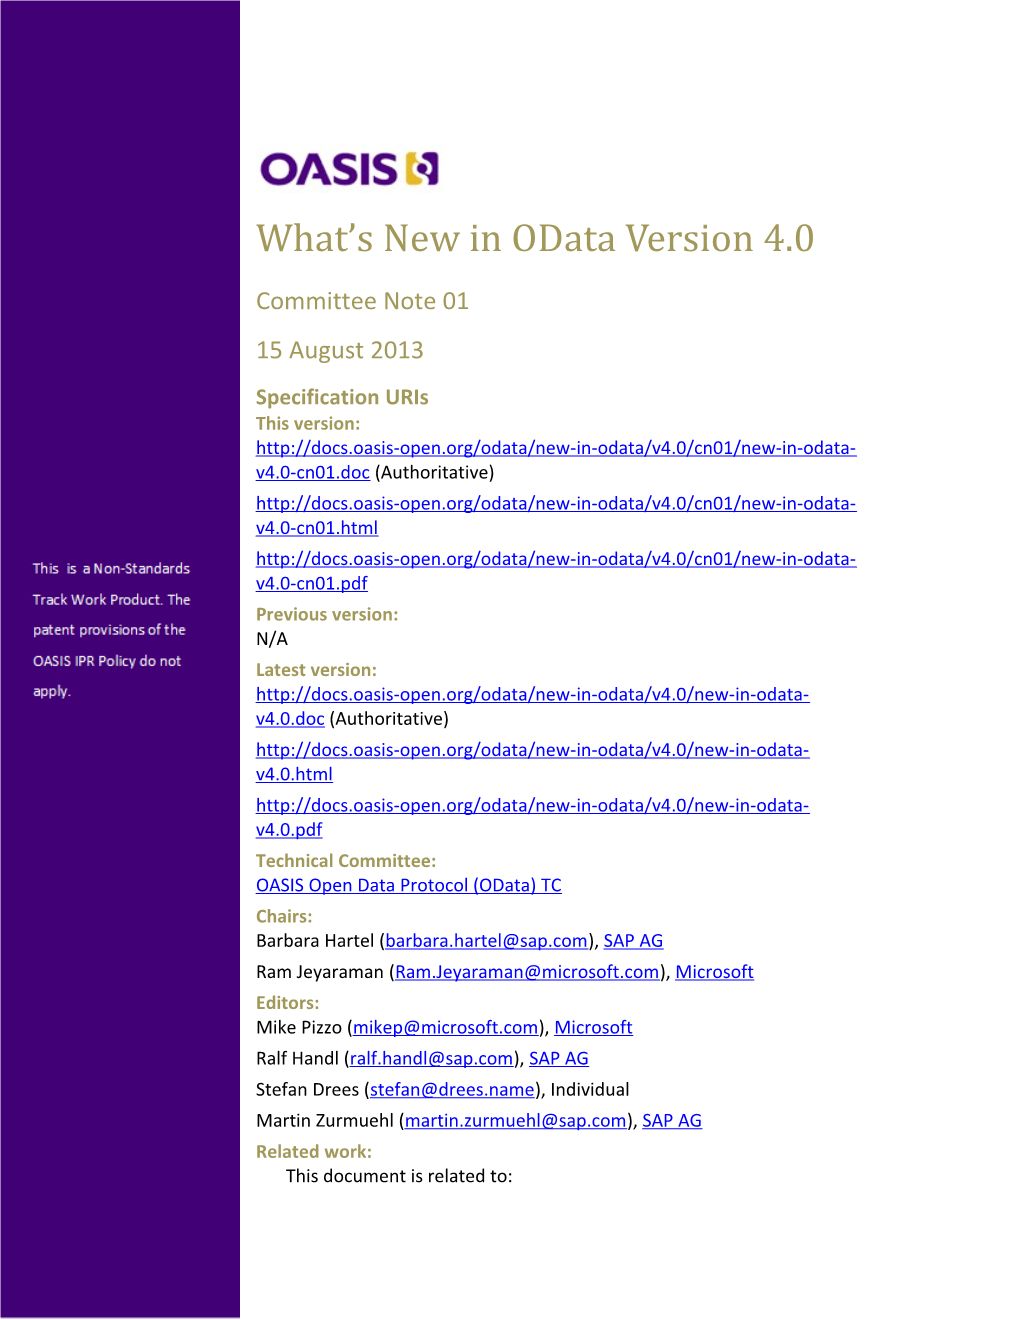 What's New in Odata Version 4.0